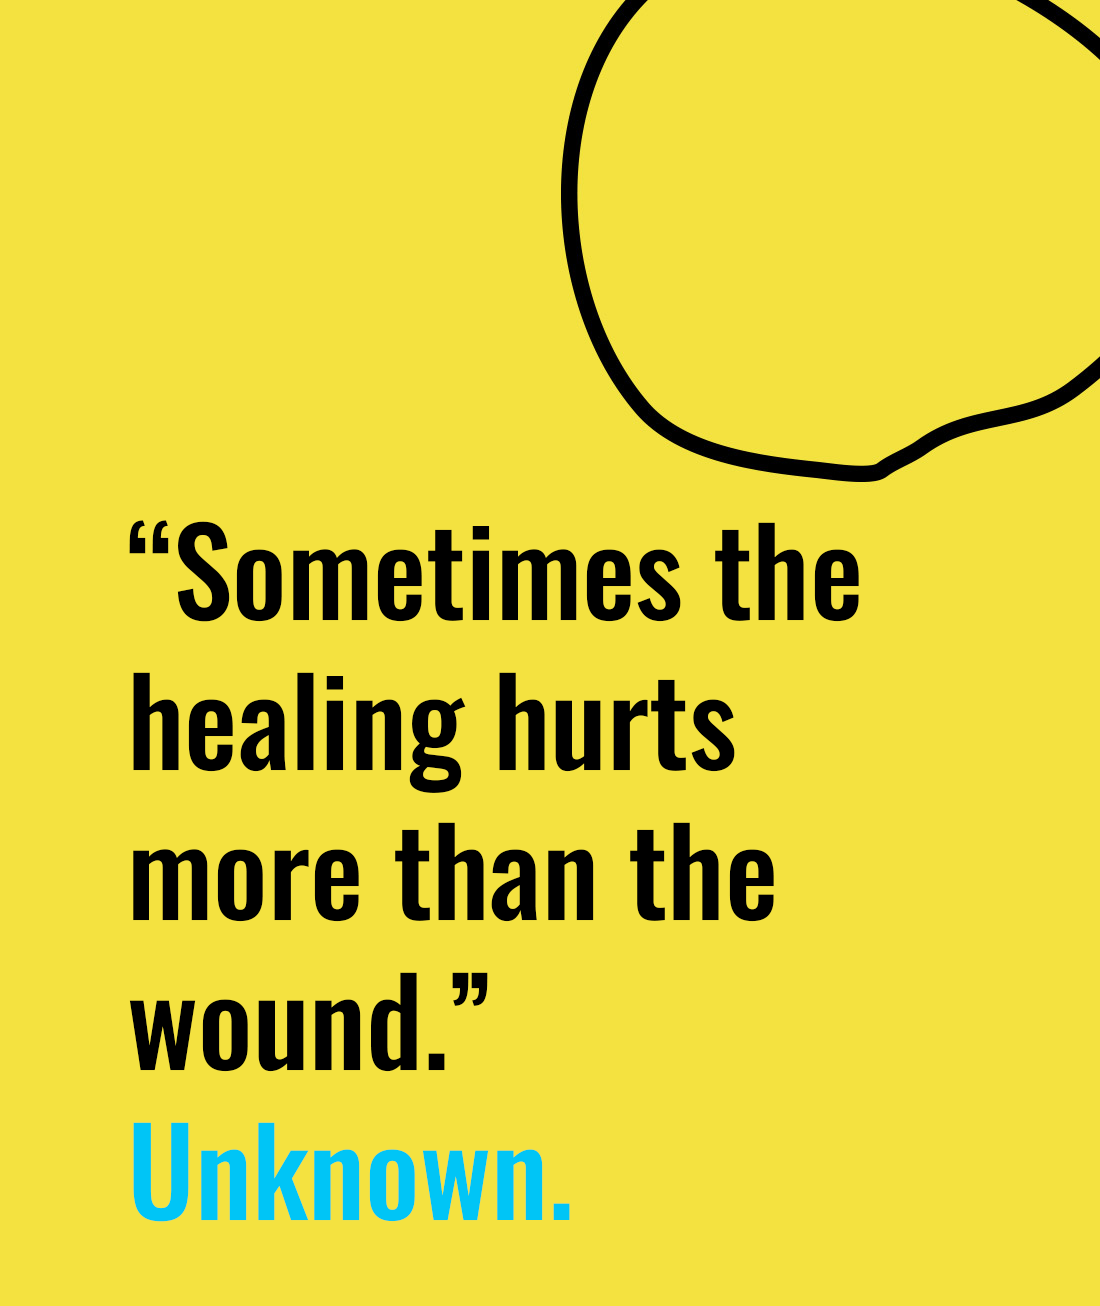 Sometimes the healing hurts more than the wound banner